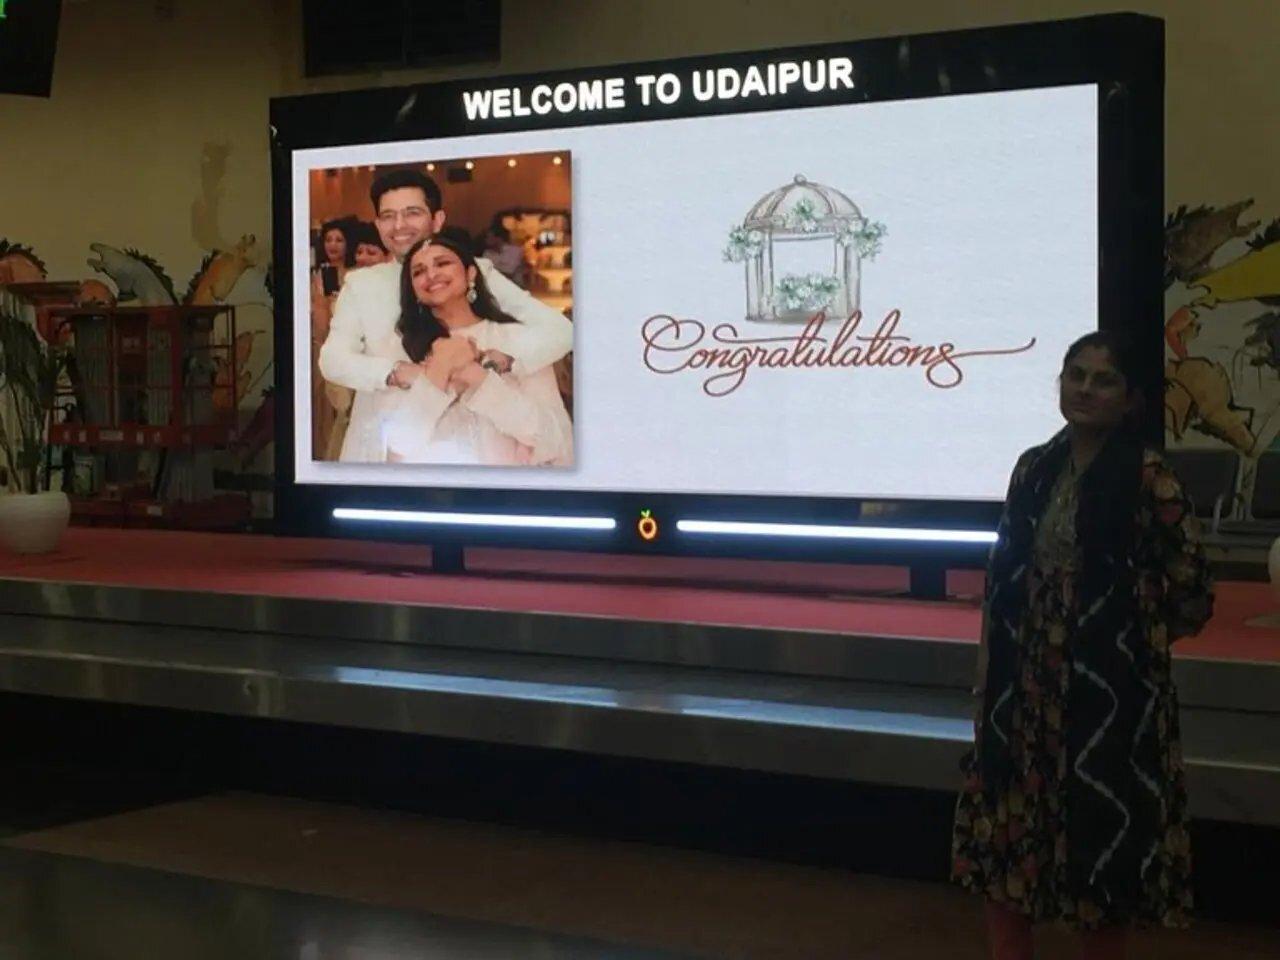 The Udiapur airport was also decked up to welcome the couple and the guests. Parineeti and Raghav along with their family members arrived in the city on Friday morning